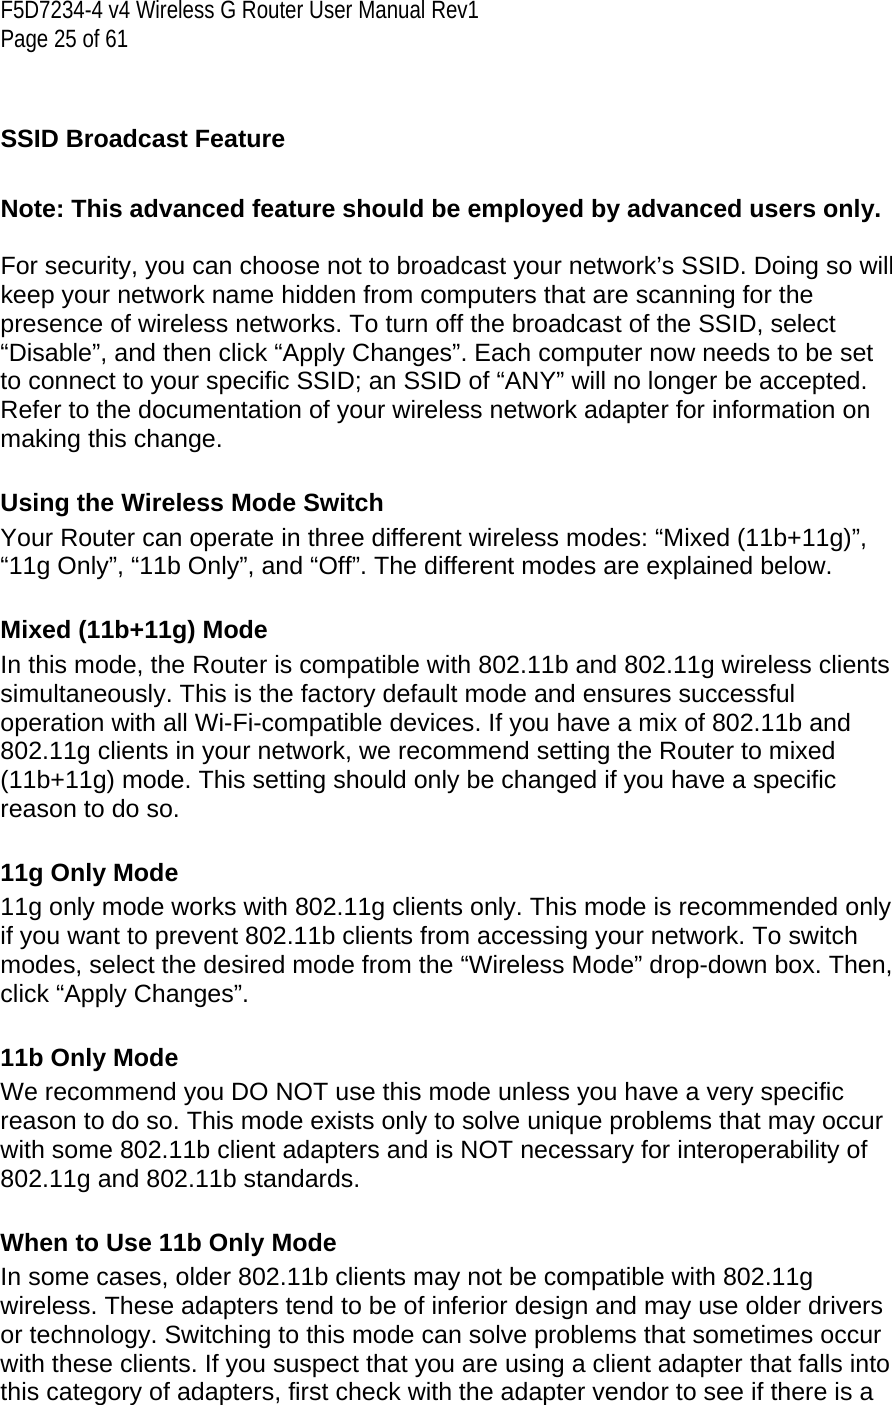 F5D7234-4 v4 Wireless G Router User Manual Rev1  Page 25 of 61    SSID Broadcast Feature   Note: This advanced feature should be employed by advanced users only.  For security, you can choose not to broadcast your network’s SSID. Doing so will keep your network name hidden from computers that are scanning for the presence of wireless networks. To turn off the broadcast of the SSID, select “Disable”, and then click “Apply Changes”. Each computer now needs to be set to connect to your specific SSID; an SSID of “ANY” will no longer be accepted. Refer to the documentation of your wireless network adapter for information on making this change.  Using the Wireless Mode Switch Your Router can operate in three different wireless modes: “Mixed (11b+11g)”, “11g Only”, “11b Only”, and “Off”. The different modes are explained below.  Mixed (11b+11g) Mode In this mode, the Router is compatible with 802.11b and 802.11g wireless clients simultaneously. This is the factory default mode and ensures successful operation with all Wi-Fi-compatible devices. If you have a mix of 802.11b and 802.11g clients in your network, we recommend setting the Router to mixed (11b+11g) mode. This setting should only be changed if you have a specific reason to do so.  11g Only Mode 11g only mode works with 802.11g clients only. This mode is recommended only if you want to prevent 802.11b clients from accessing your network. To switch modes, select the desired mode from the “Wireless Mode” drop-down box. Then, click “Apply Changes”.  11b Only Mode We recommend you DO NOT use this mode unless you have a very specific reason to do so. This mode exists only to solve unique problems that may occur with some 802.11b client adapters and is NOT necessary for interoperability of 802.11g and 802.11b standards.  When to Use 11b Only Mode In some cases, older 802.11b clients may not be compatible with 802.11g wireless. These adapters tend to be of inferior design and may use older drivers or technology. Switching to this mode can solve problems that sometimes occur with these clients. If you suspect that you are using a client adapter that falls into this category of adapters, first check with the adapter vendor to see if there is a 